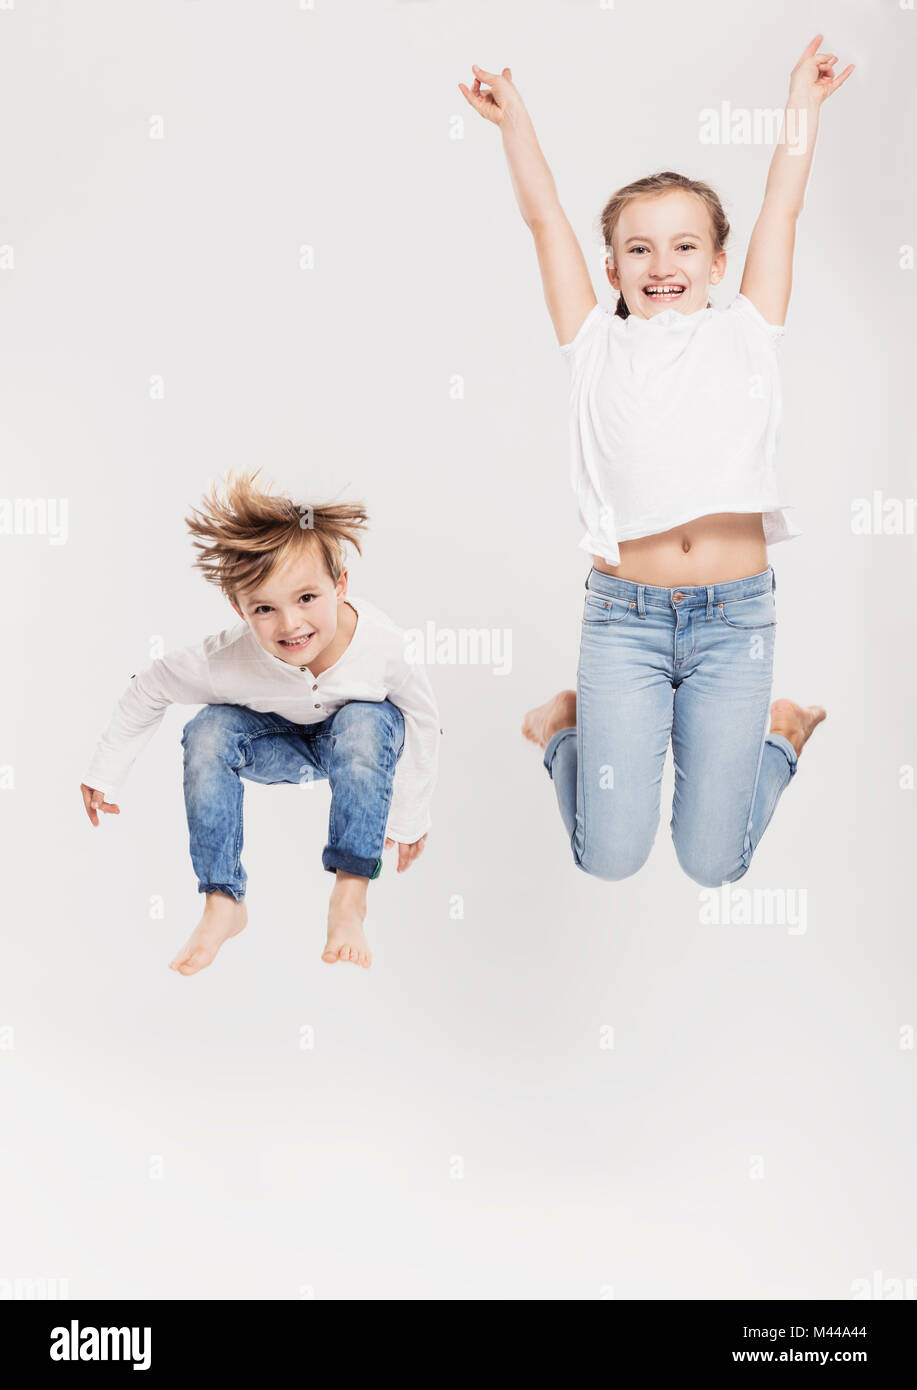 Portrait of brother and sister leaping in air Stock Photo